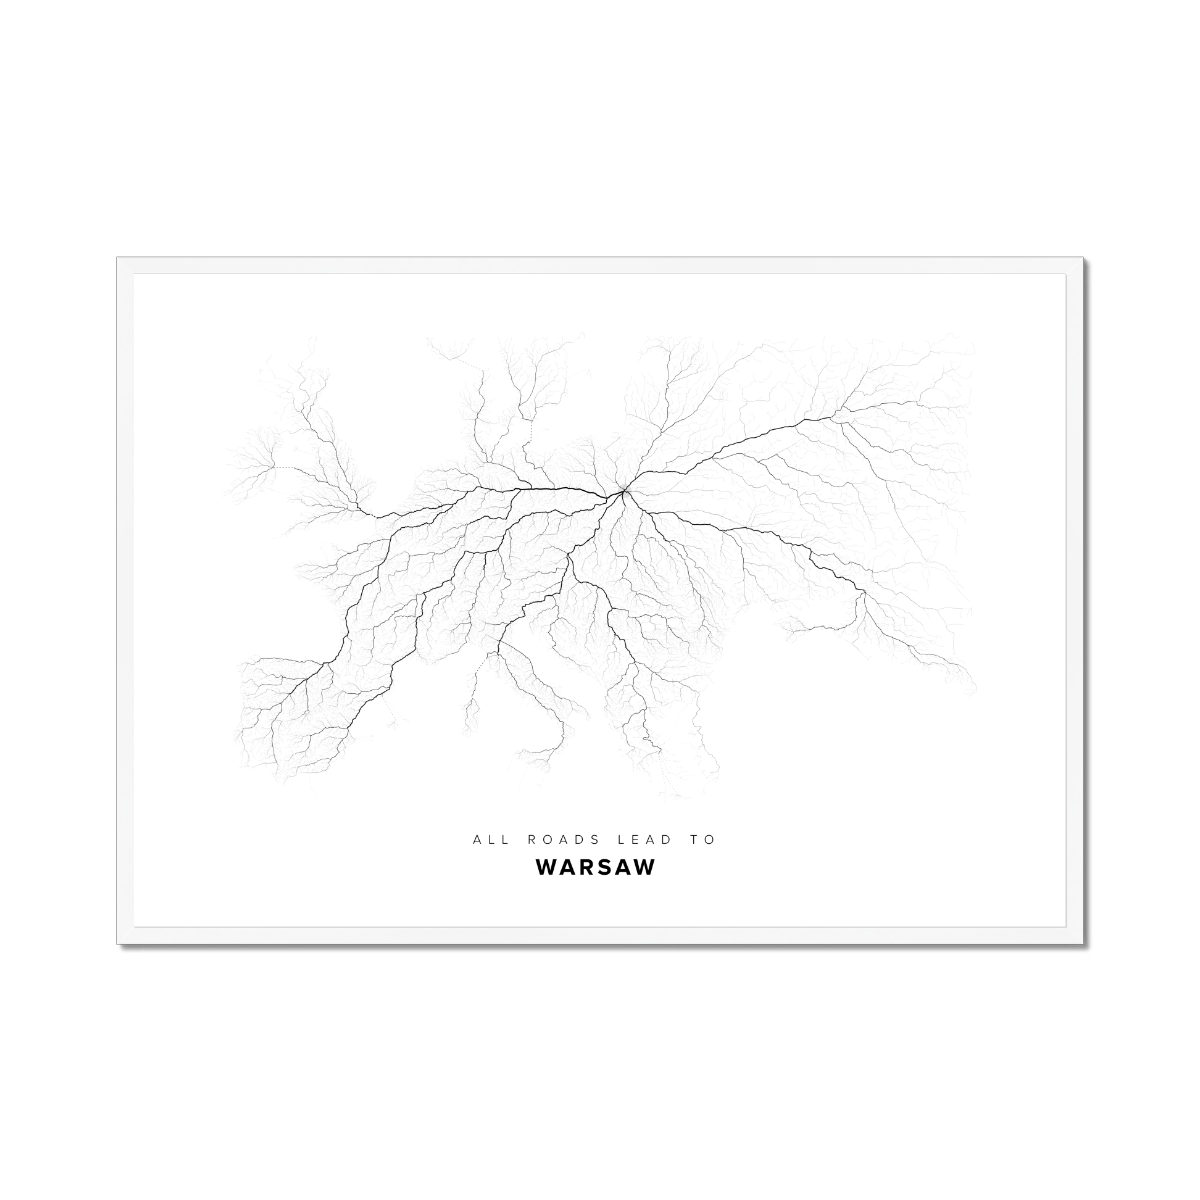 All roads lead to Warsaw (Poland) Fine Art Map Print